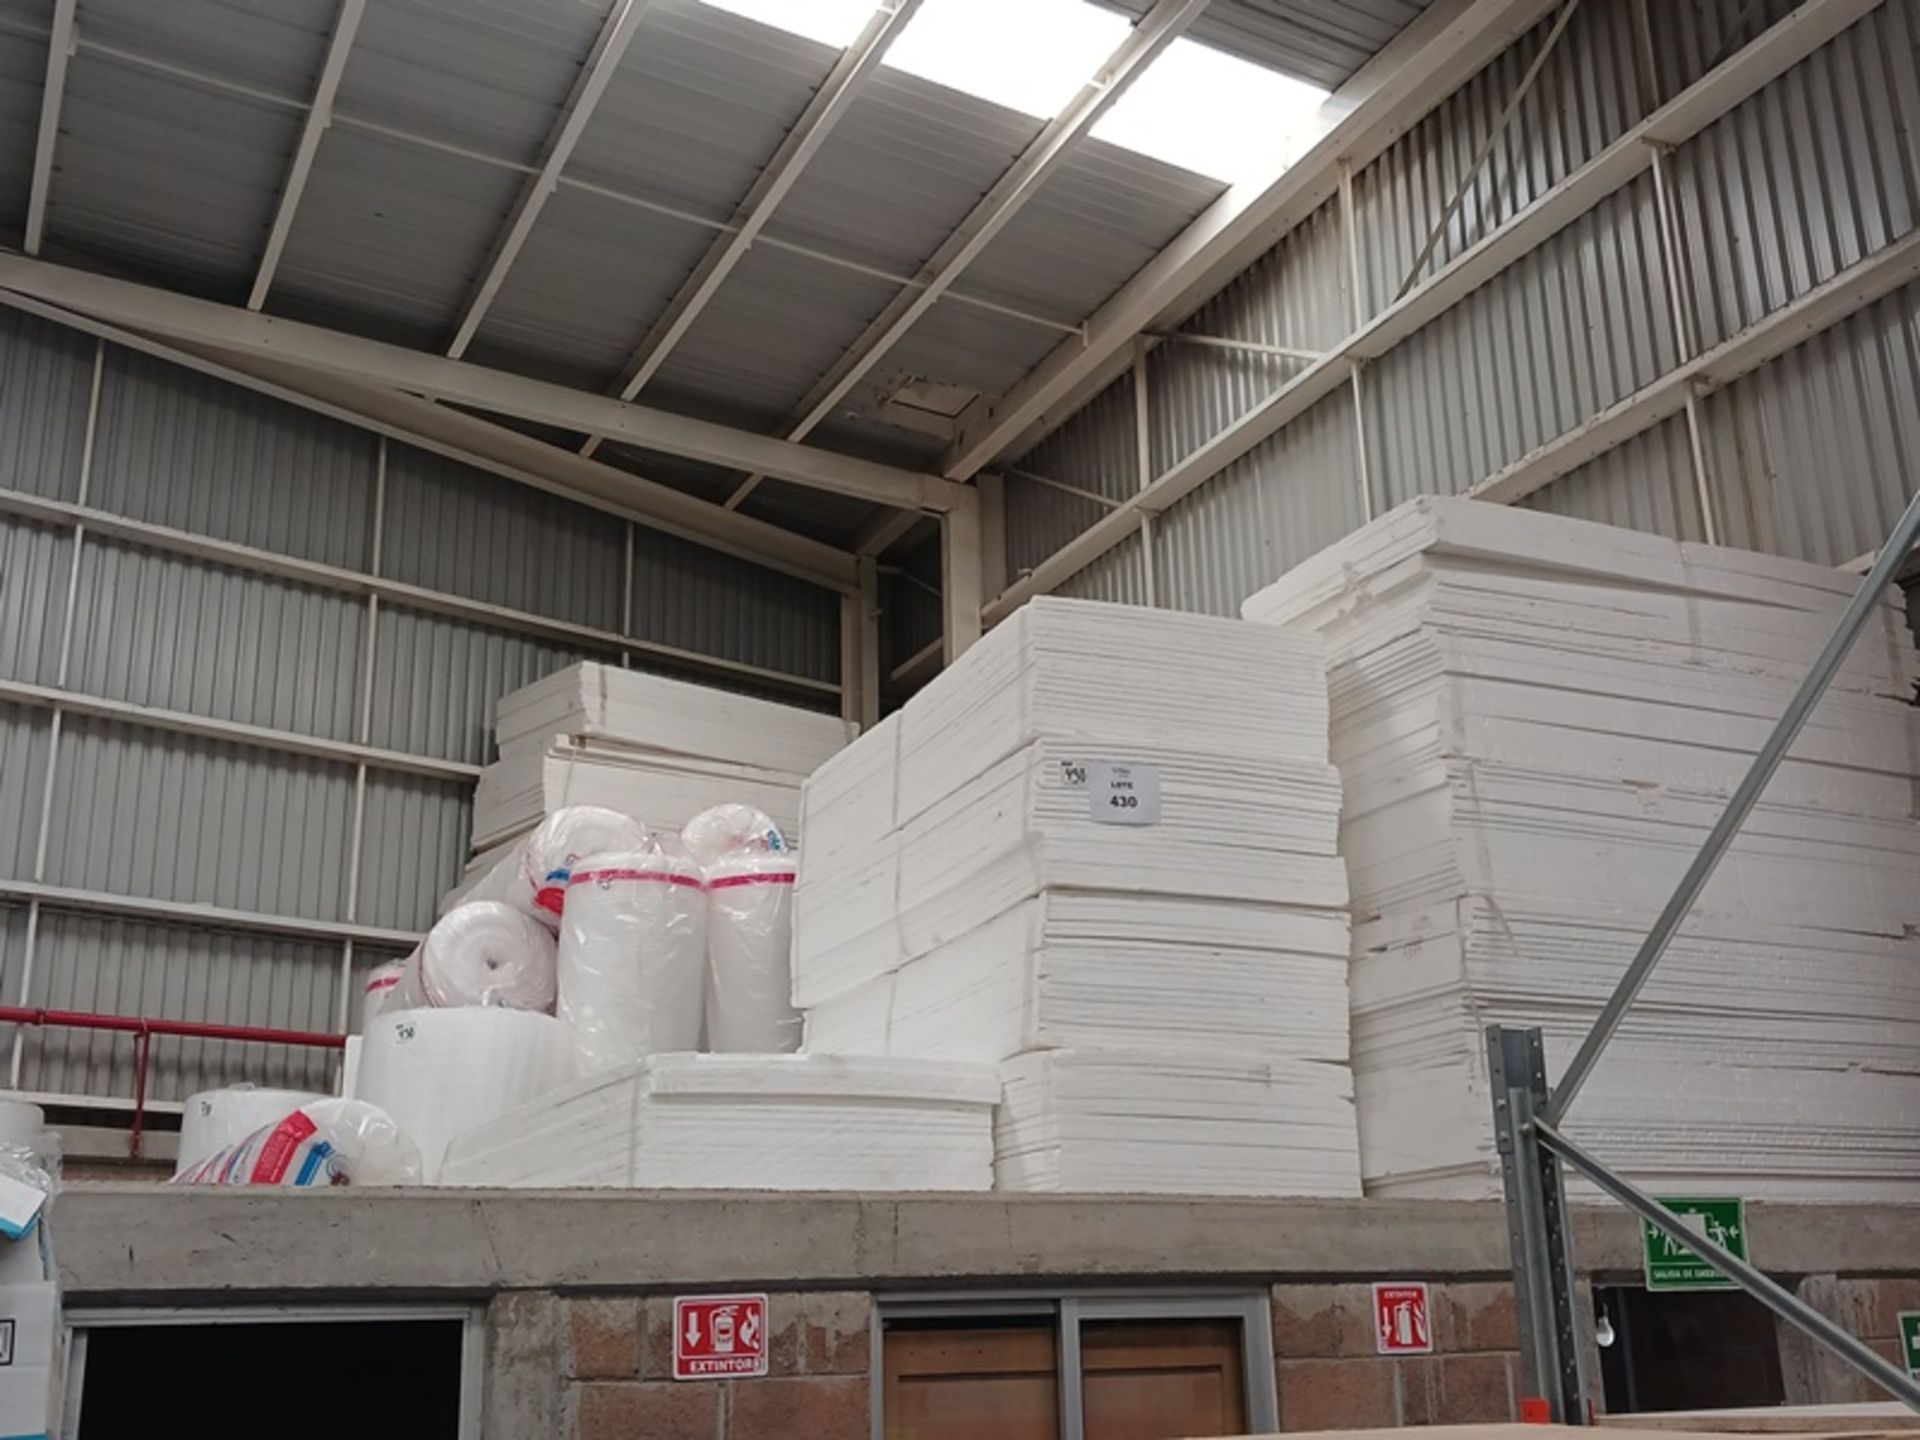 LOT OF (442) PCS BALES OF UNICEL BOARDS AND ROLLS OF EXPANDED POLYURETHANE - Image 7 of 7